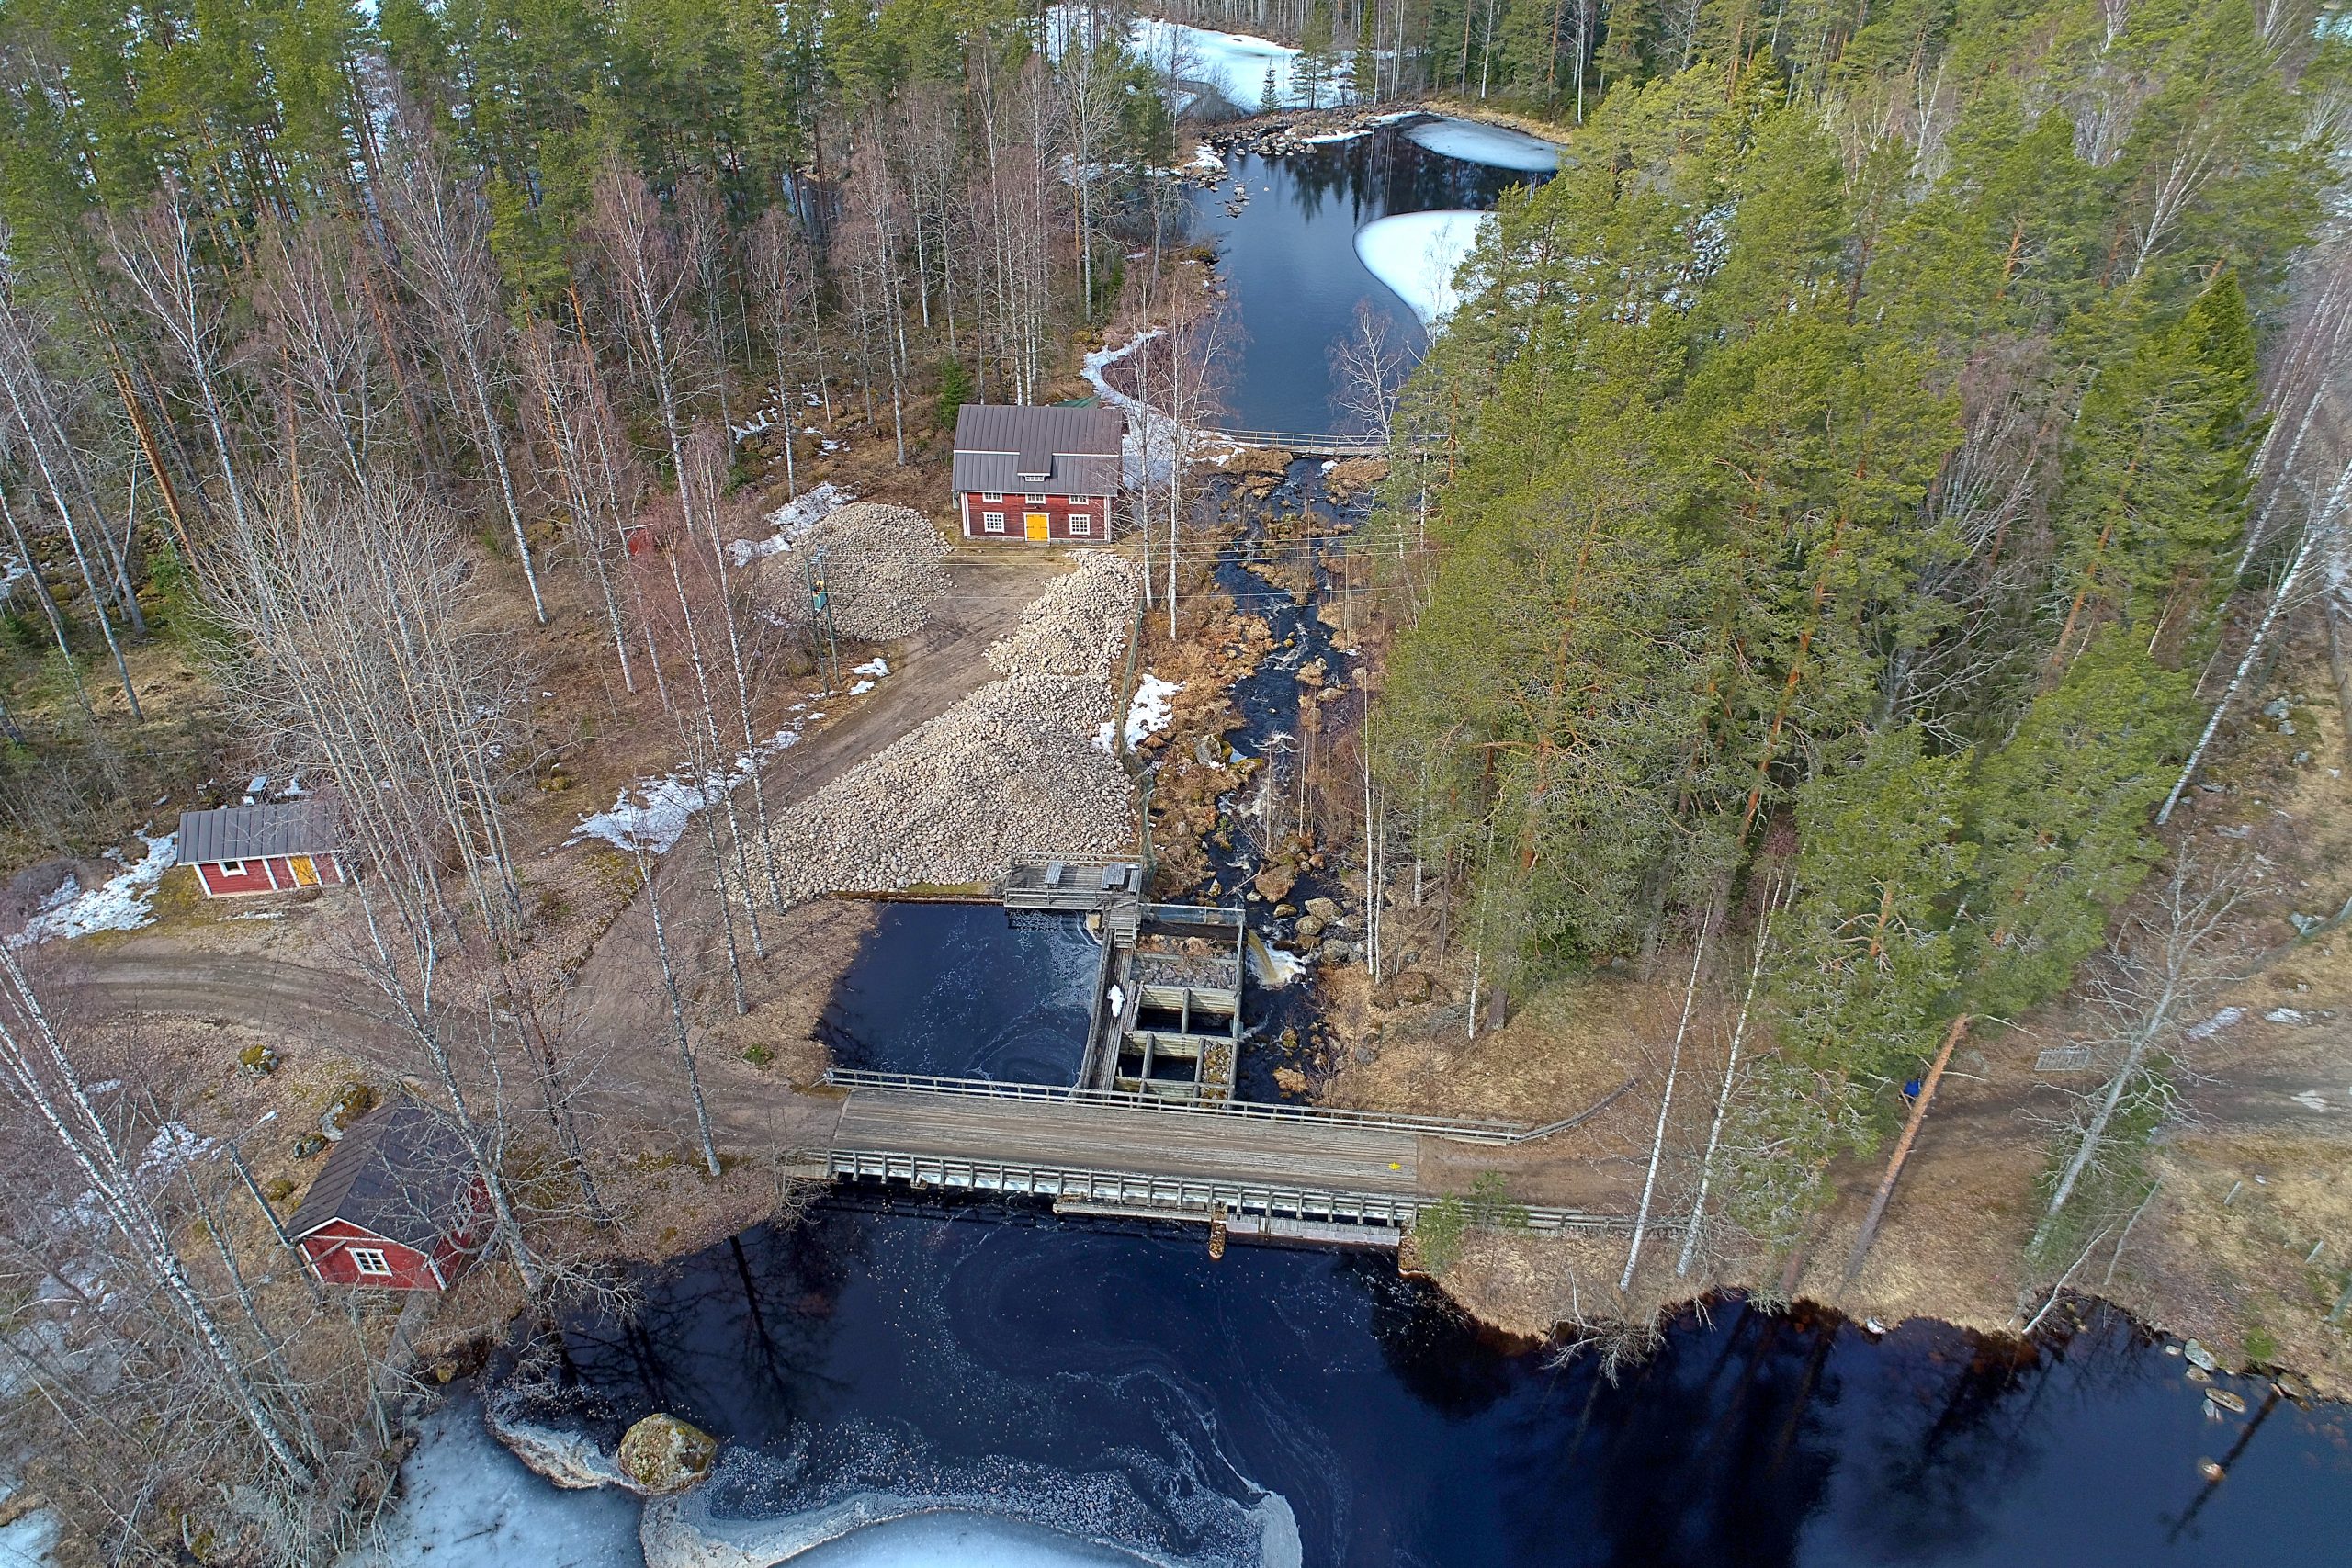 WWF Finland opens up two more dams this month!